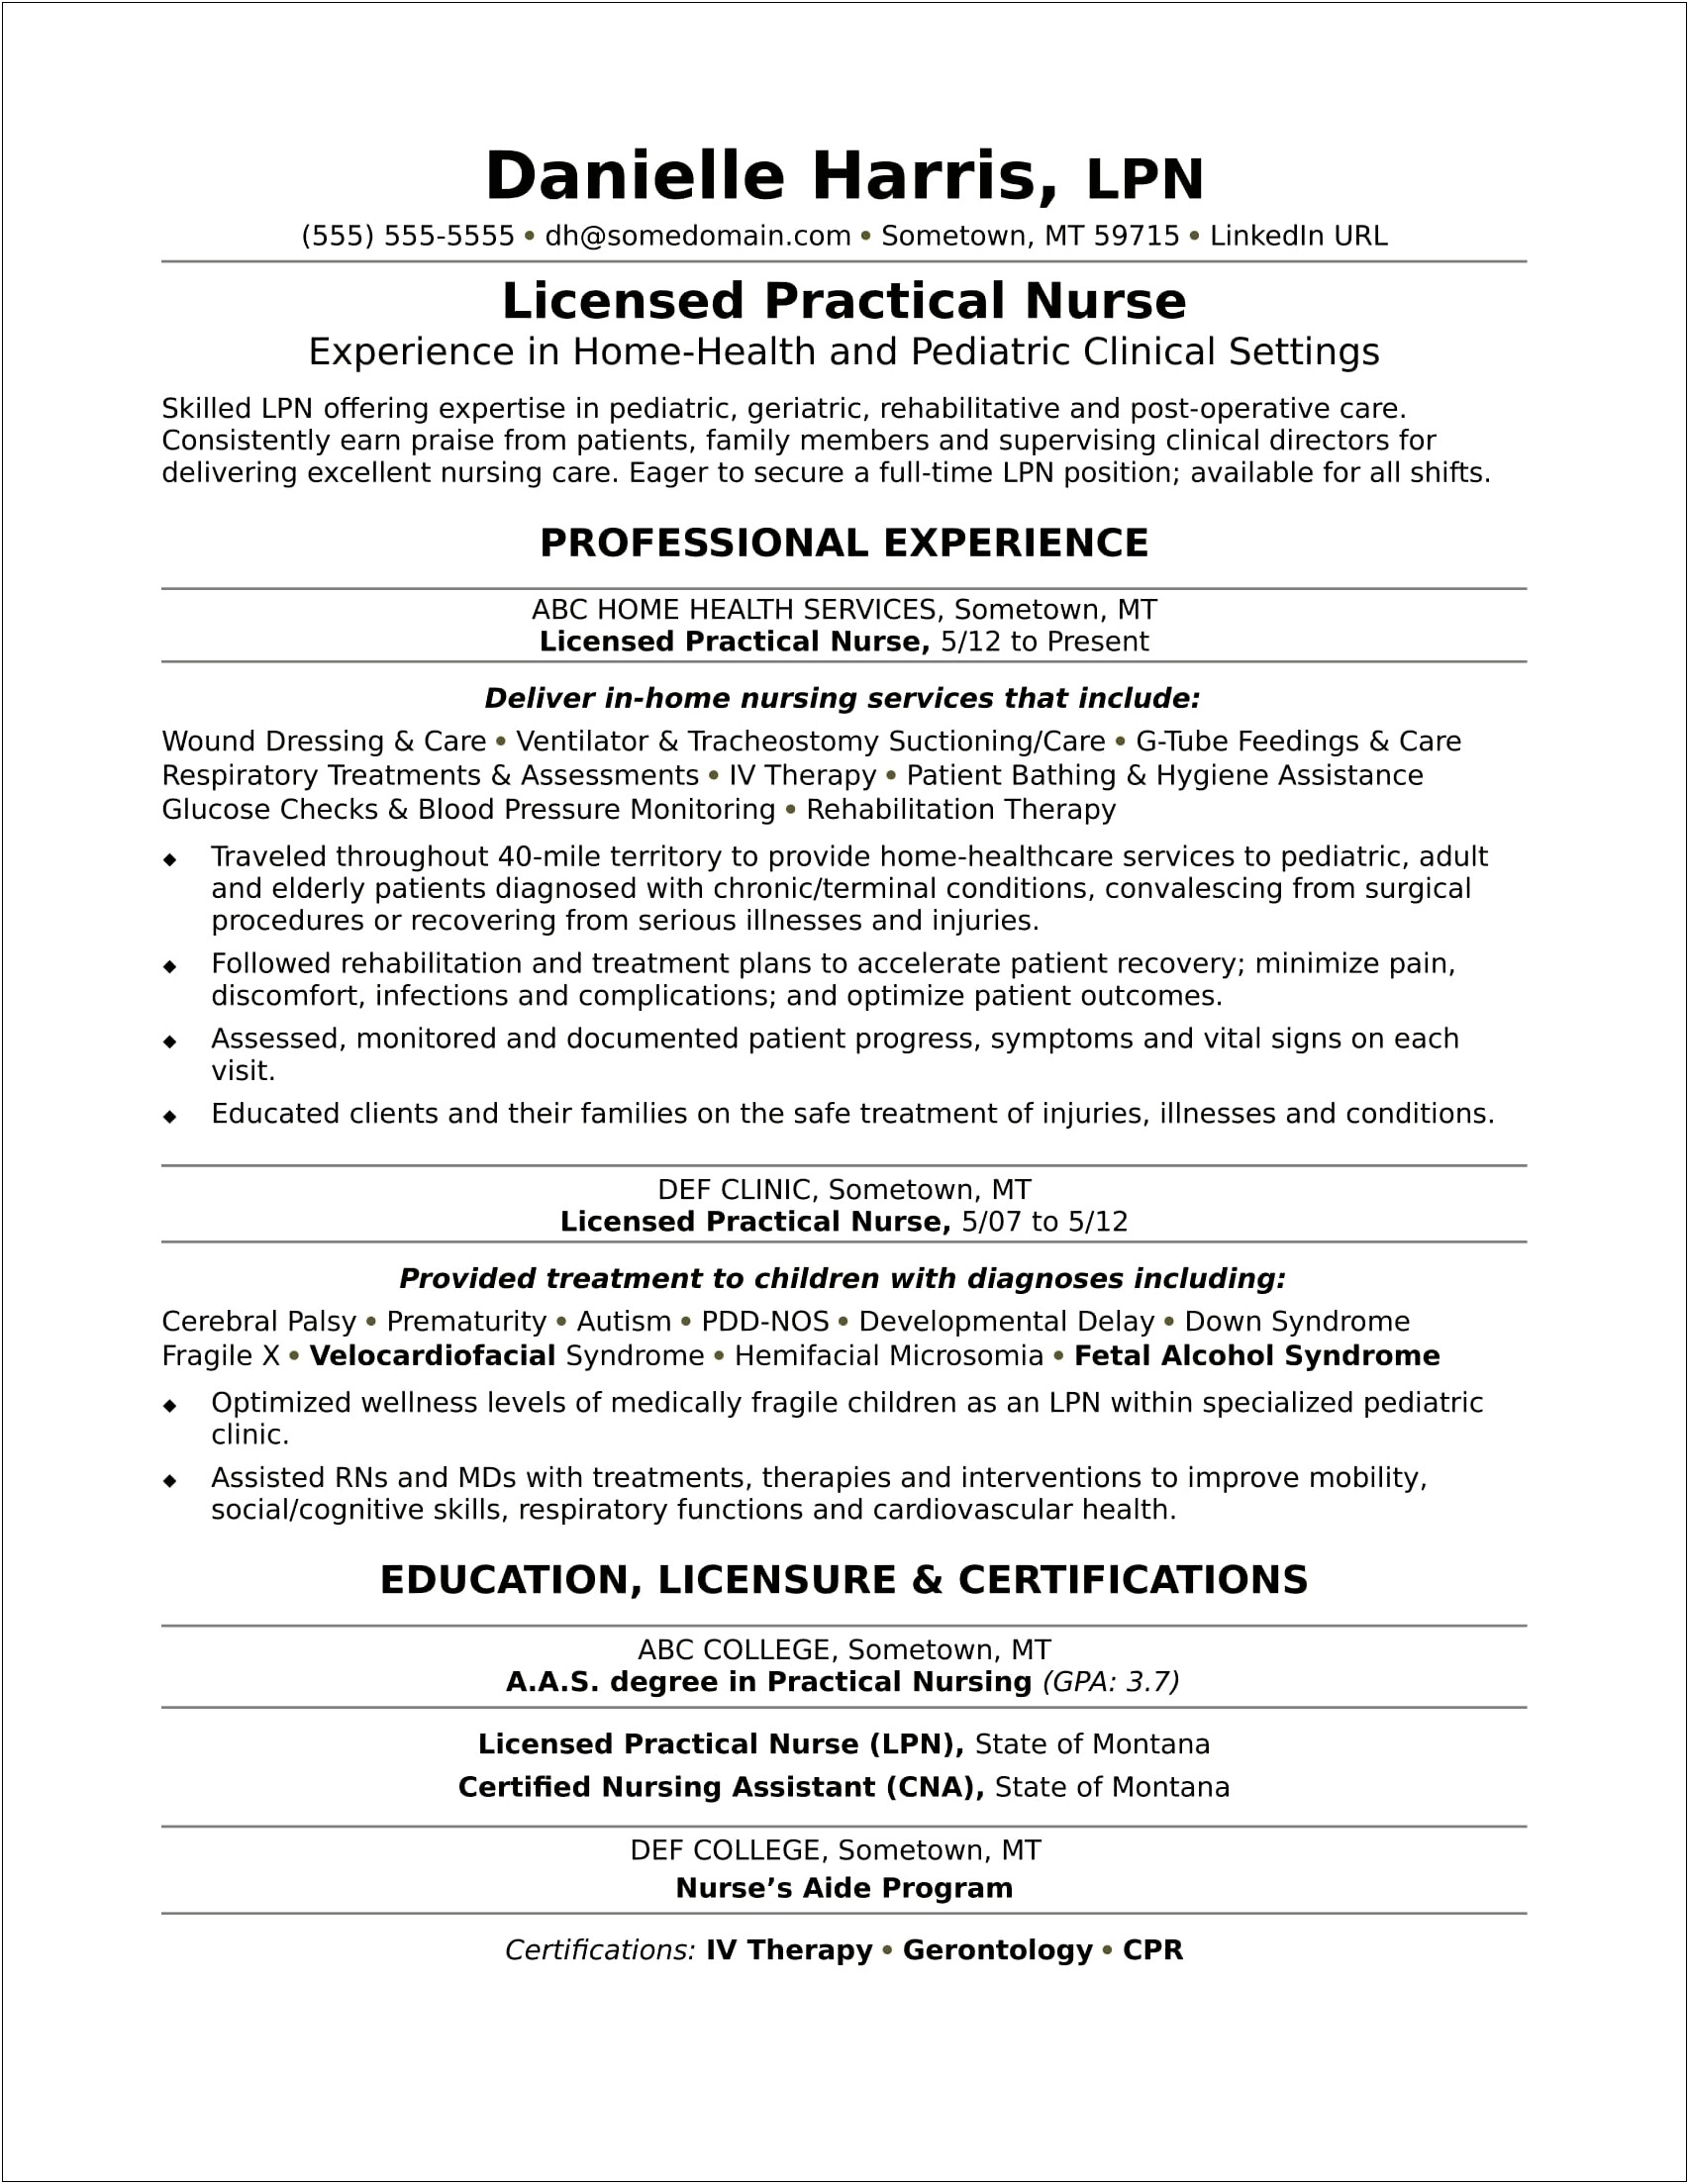 Resume Words For Home Health Aide